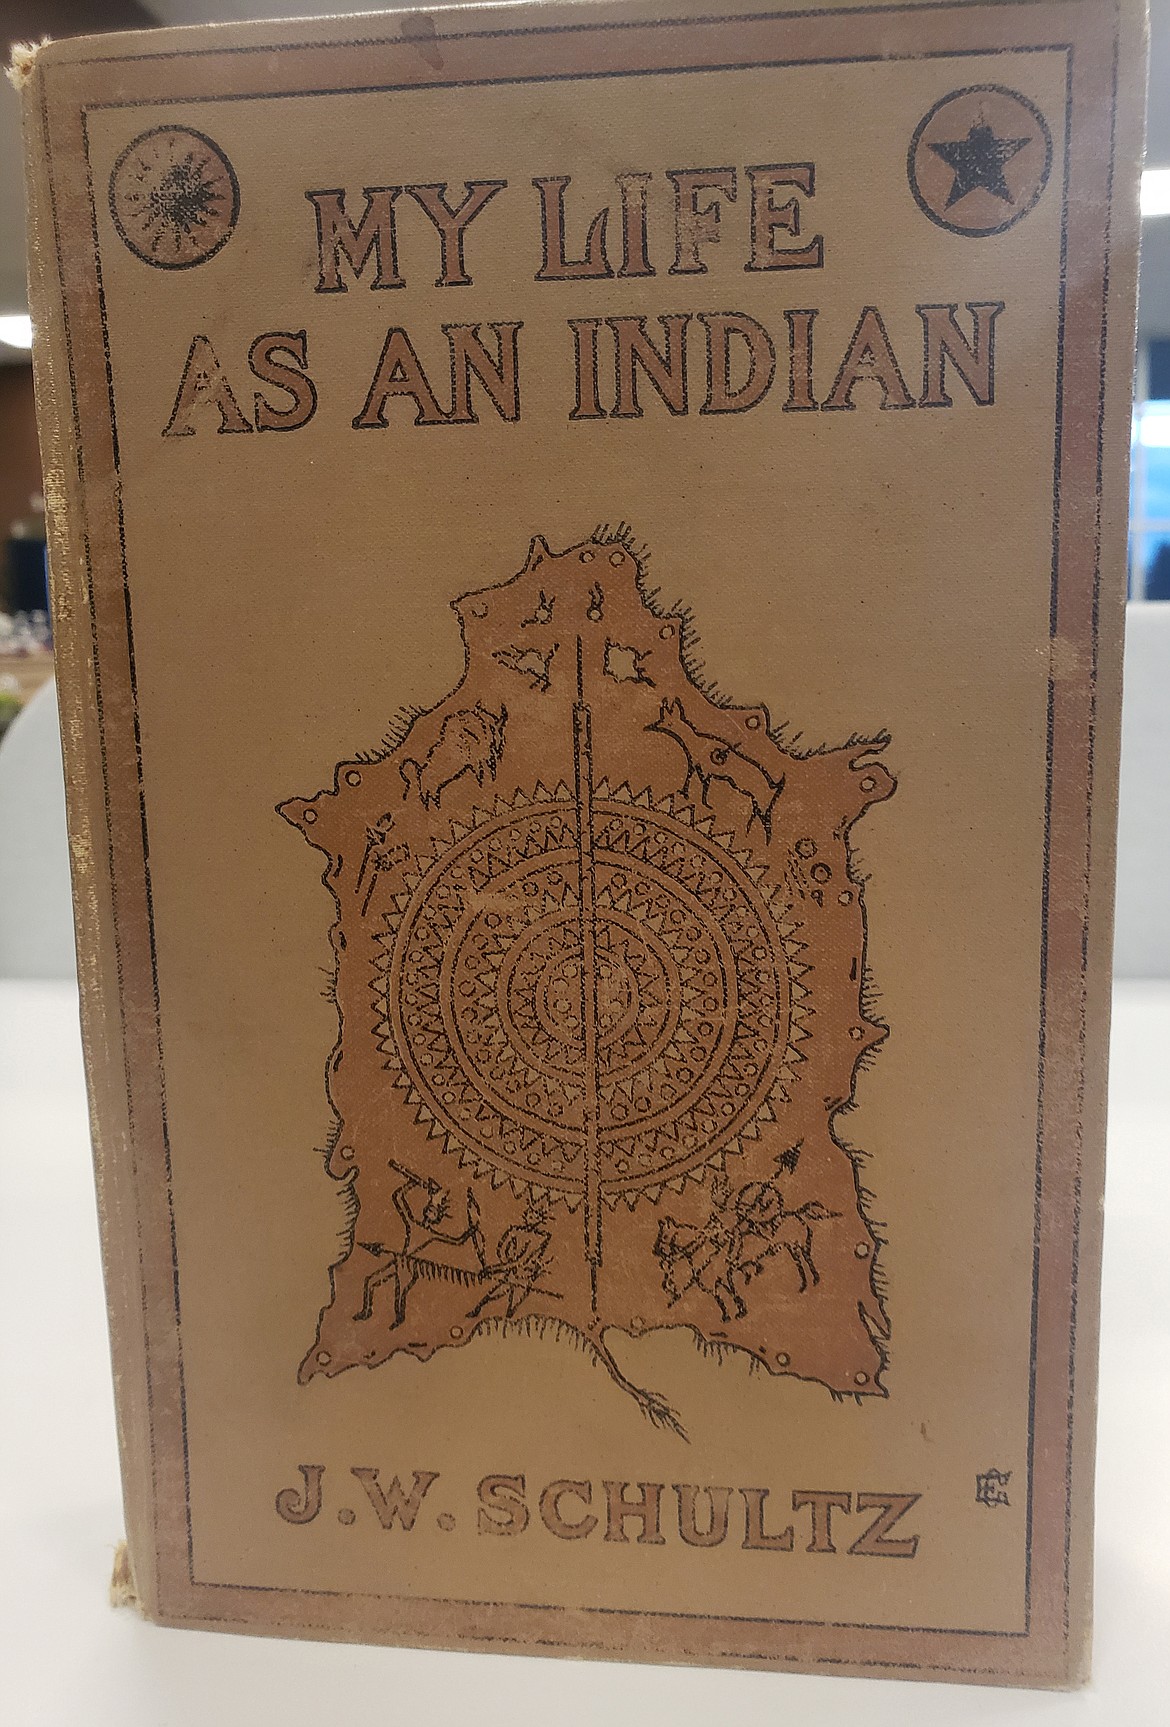 A rare 1907 first edition of James Willard Schultz's memoir "My Life as an Indian" is part of the Allen L. Chickering Collection recently acquired by the FVCC library.